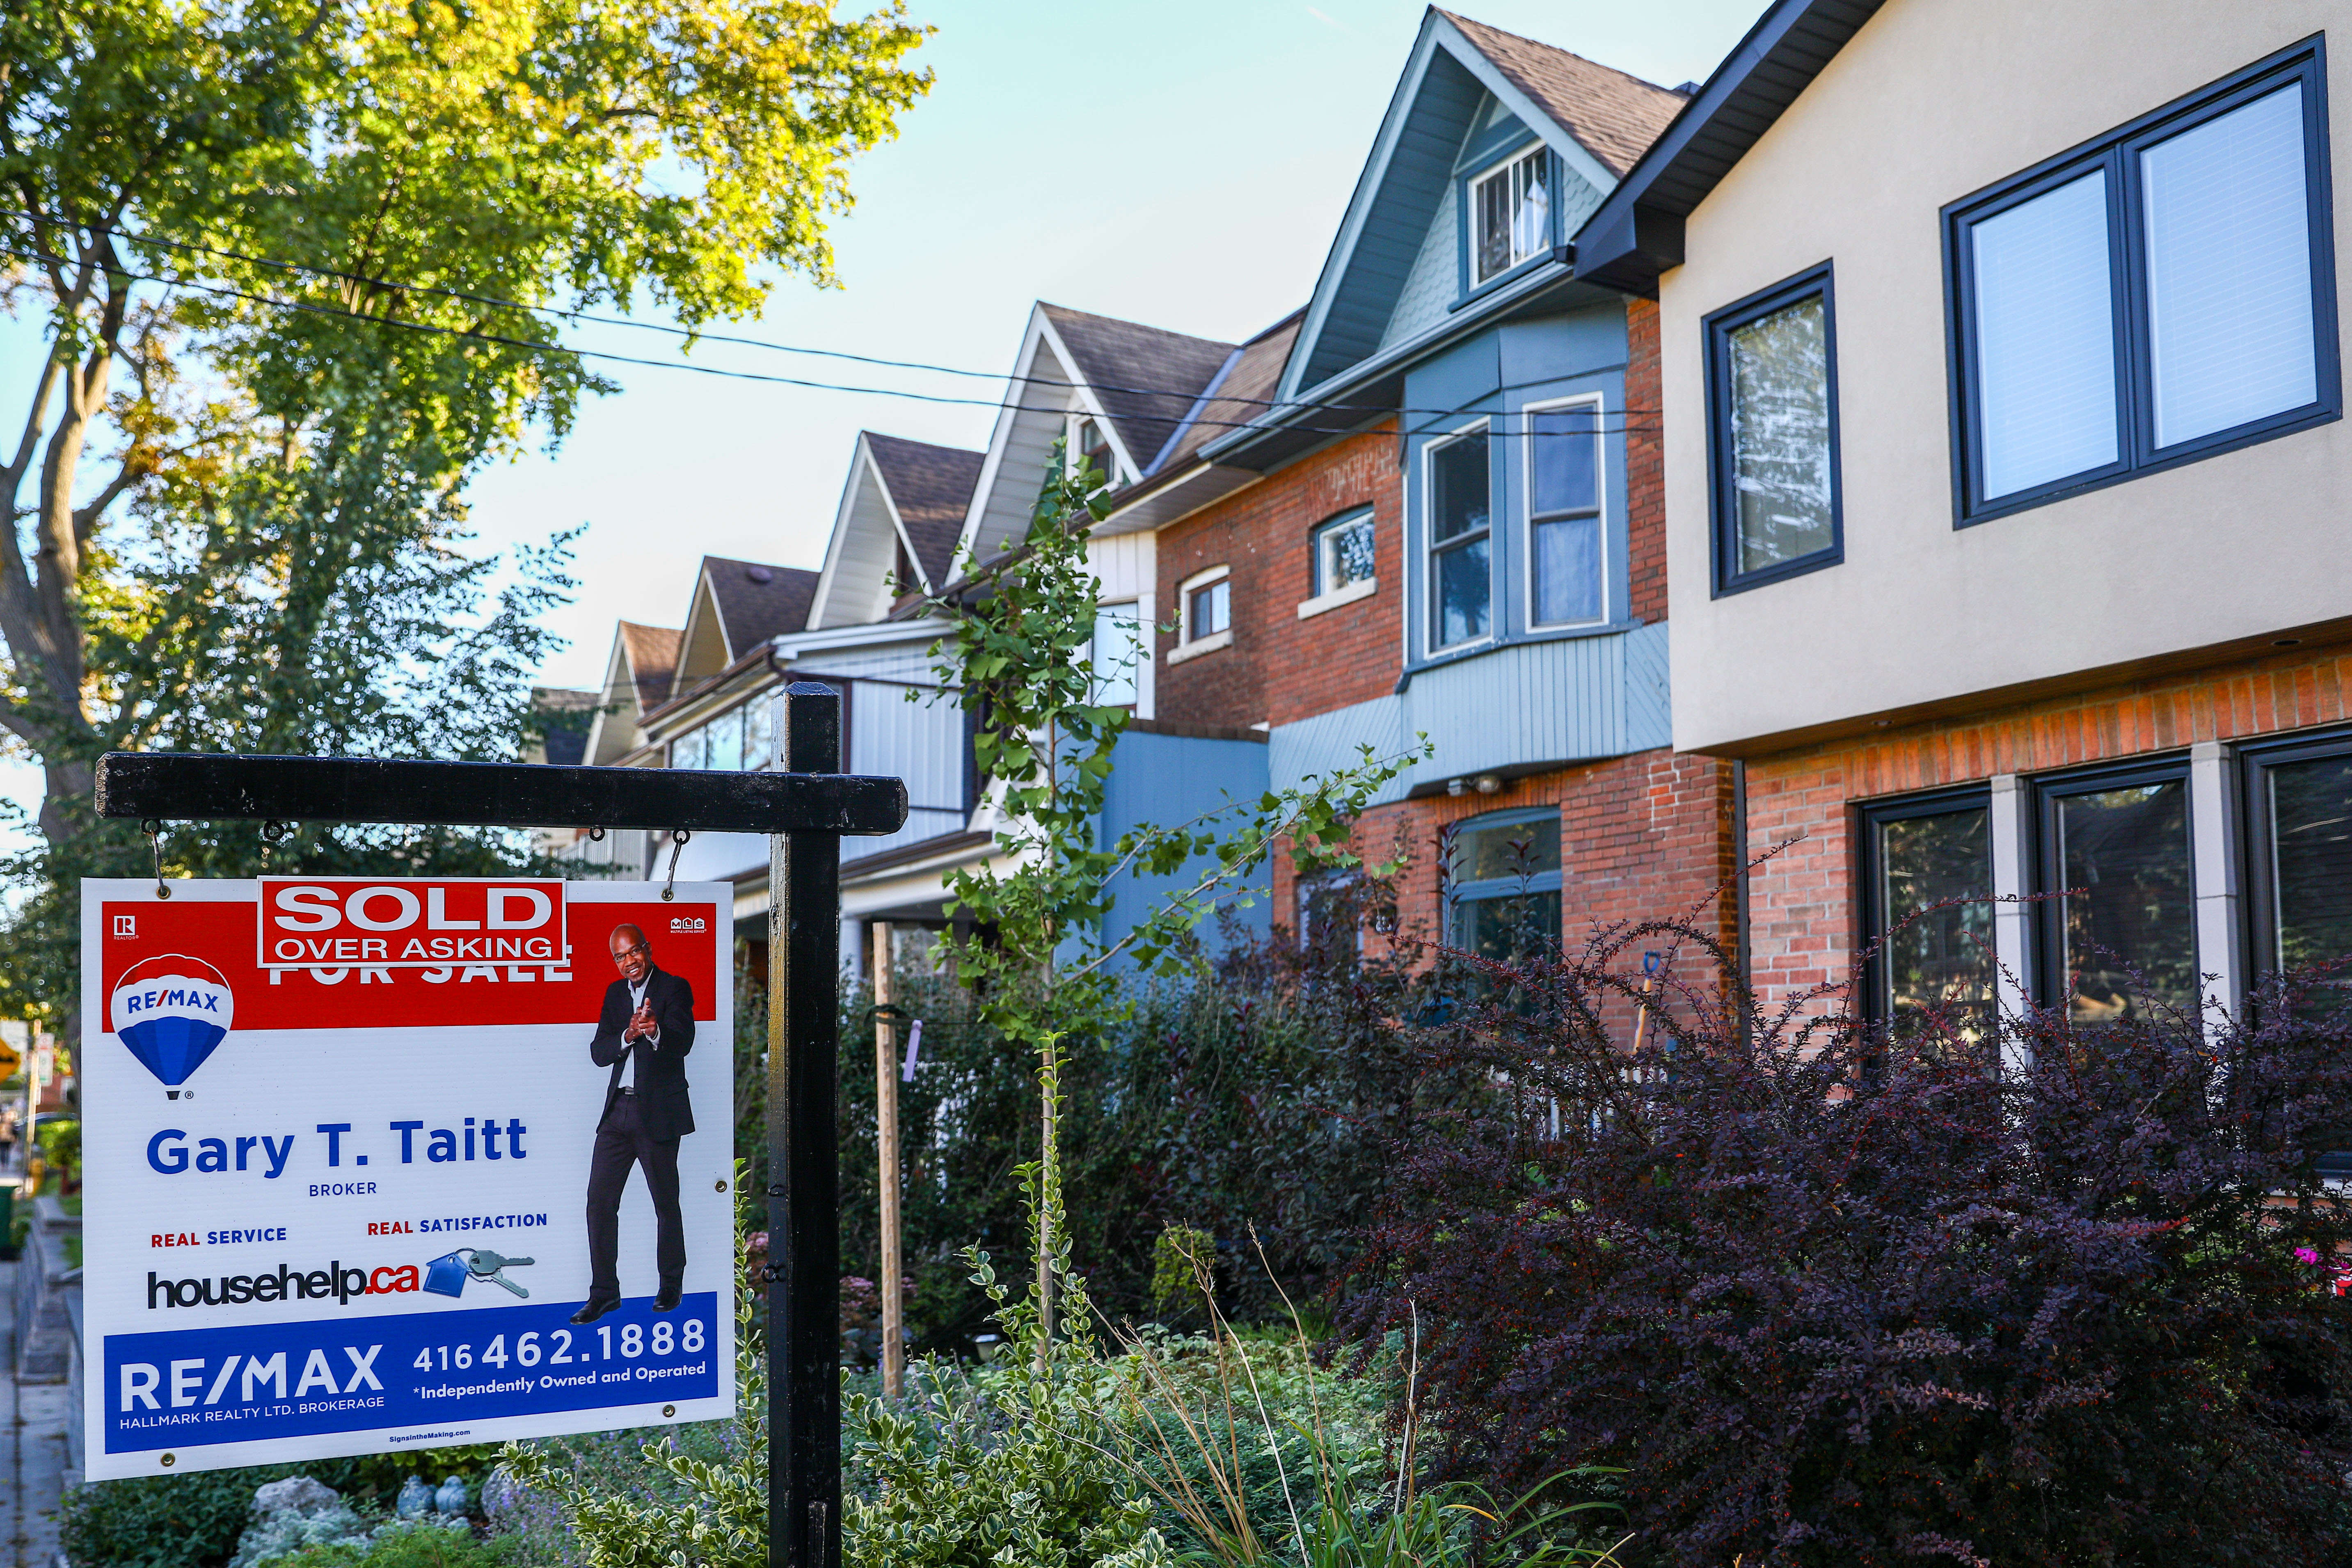 globalnews.ca - Amanda Connolly - Greater Toronto Area real estate approaching 'buyer's market': BMO